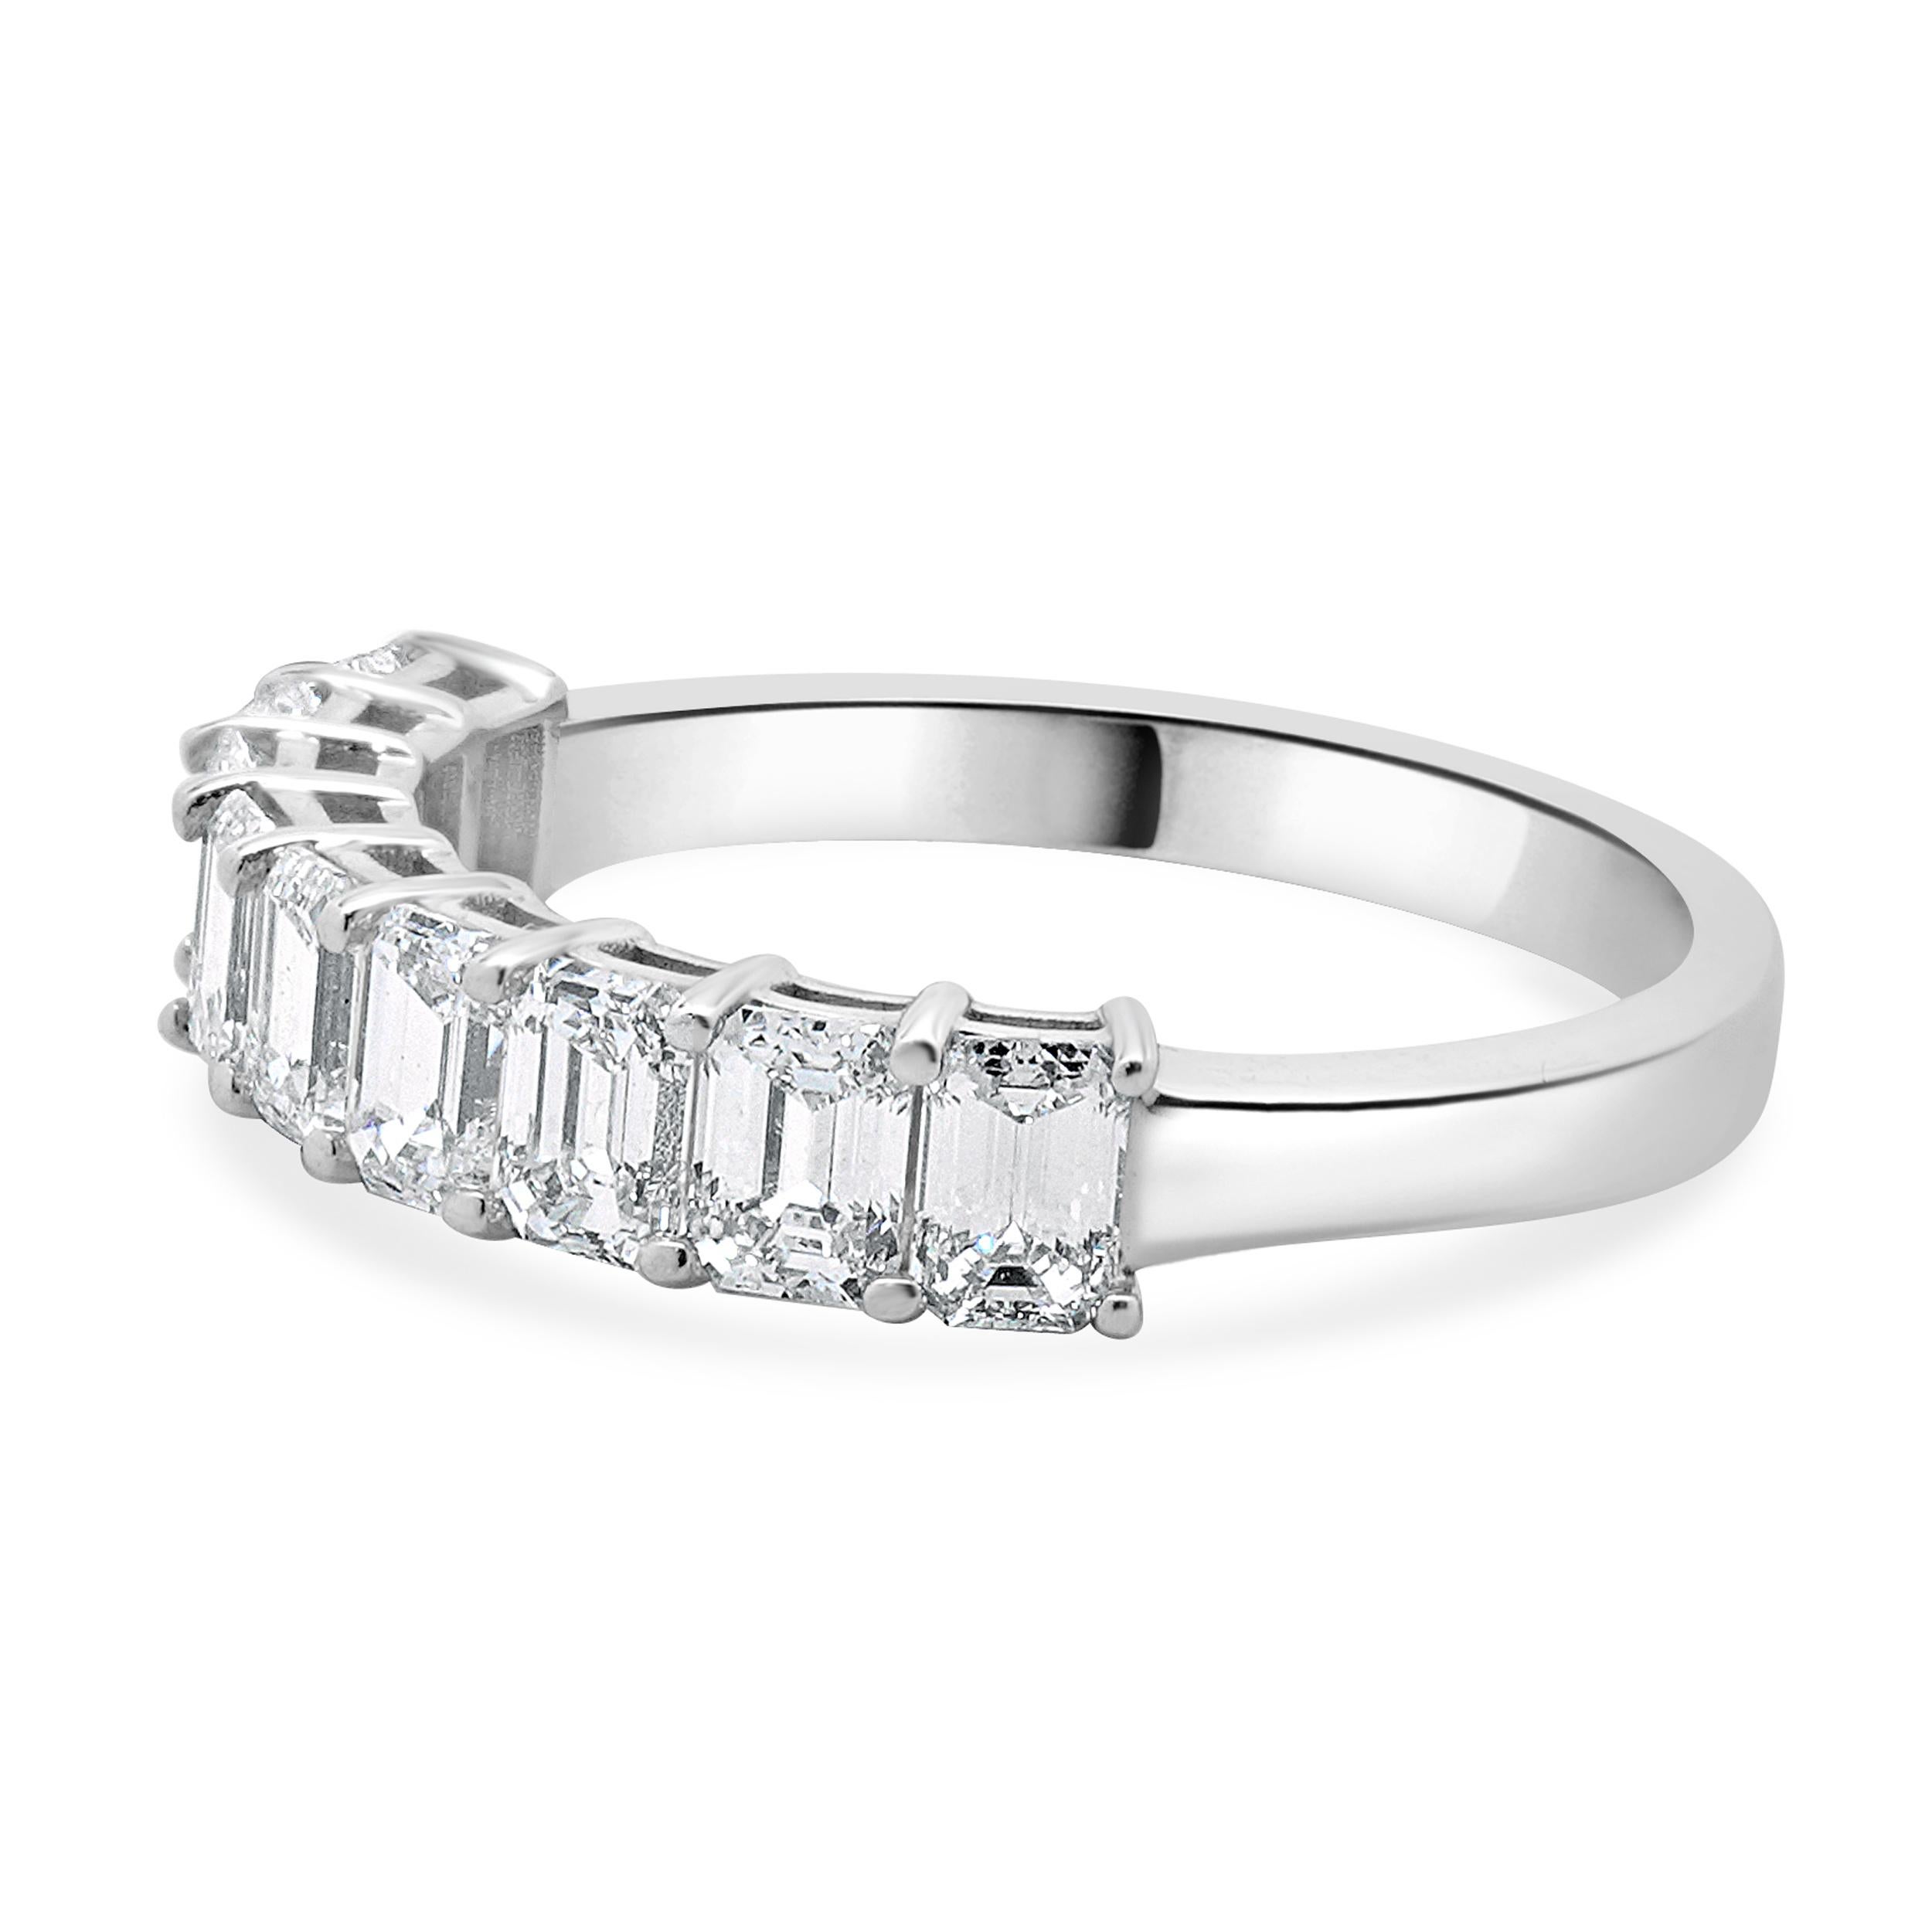 Designer: custom
Material: 14K white gold
Diamond: 9 emerald cut = 1.70cttw
Color: G / H
Clarity: VS-SI1
Ring size: 6.75 (please allow two additional shipping days for sizing requests)
Weight: 2.85 grams
